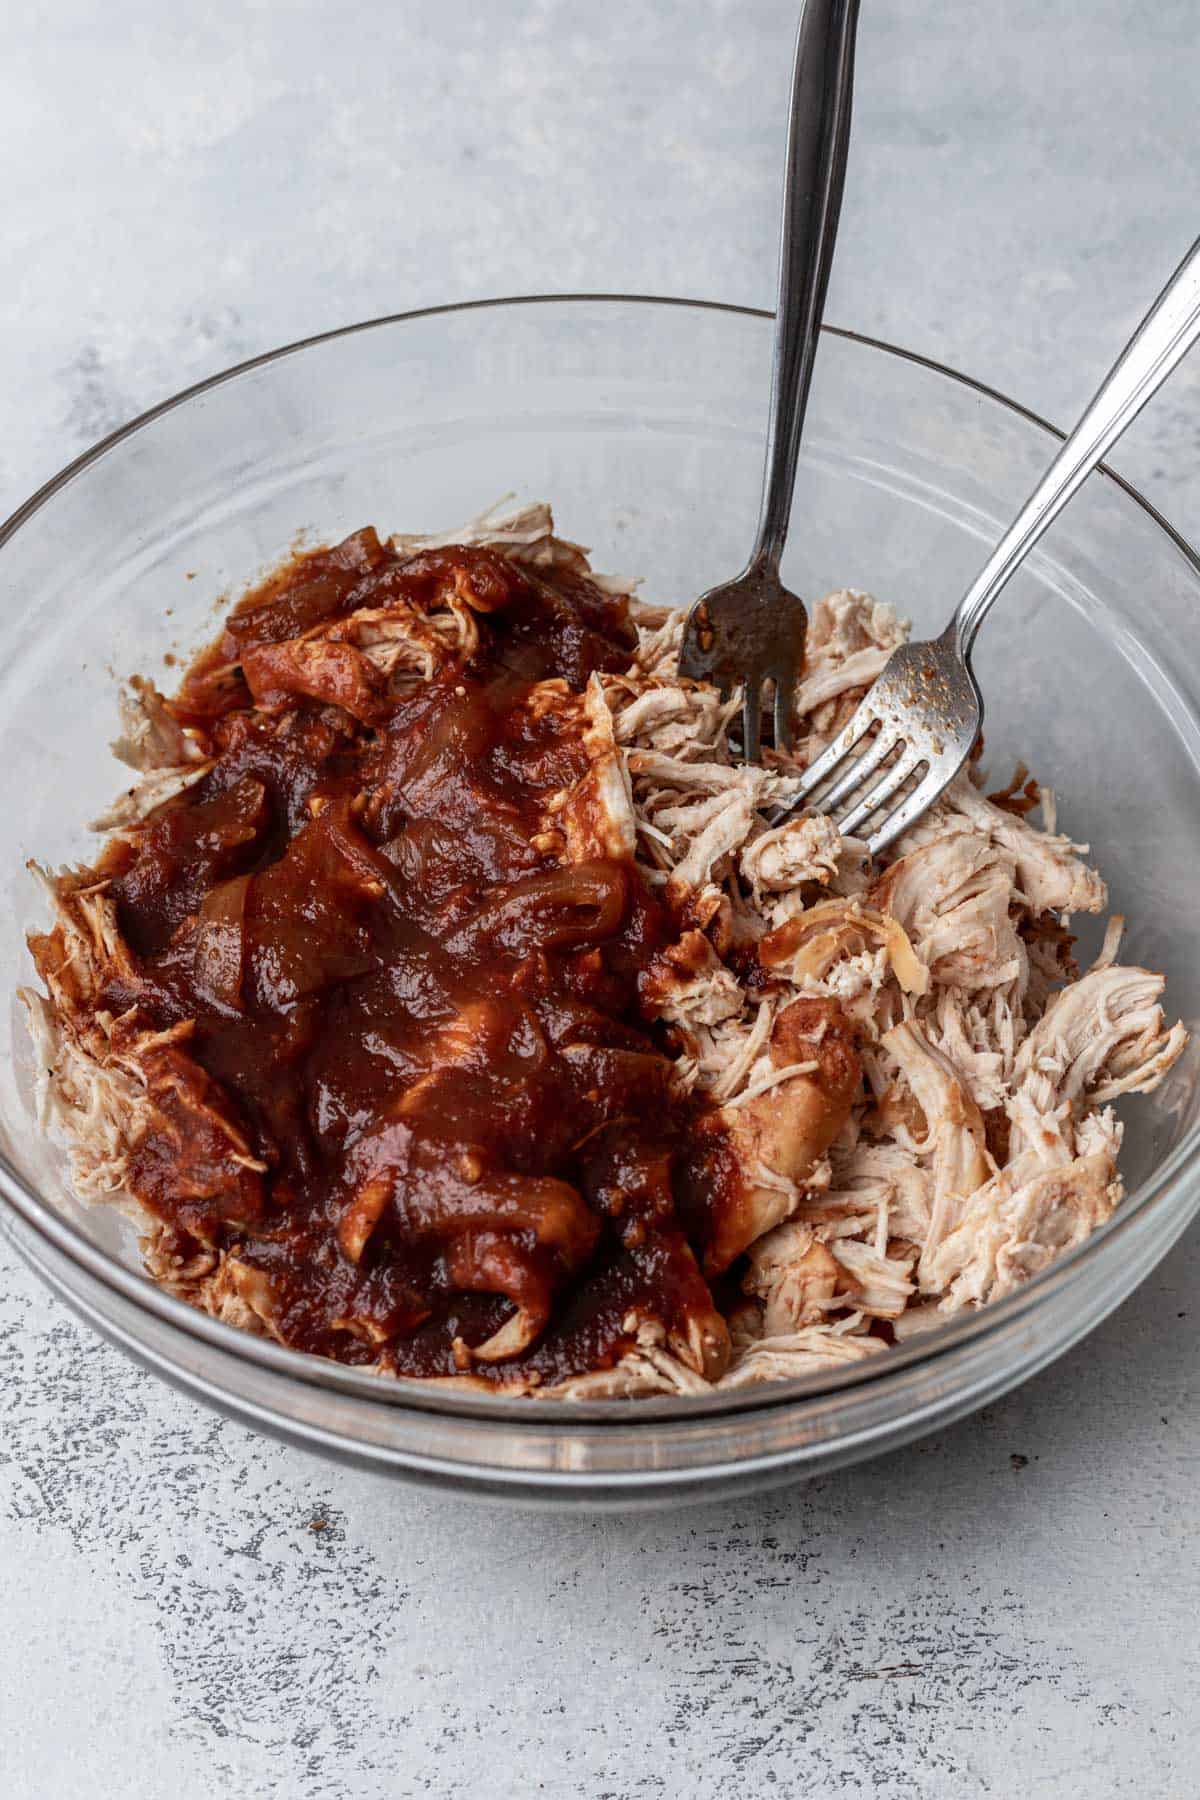 Shredded chicken in a mixing bowl with bbq sauce.